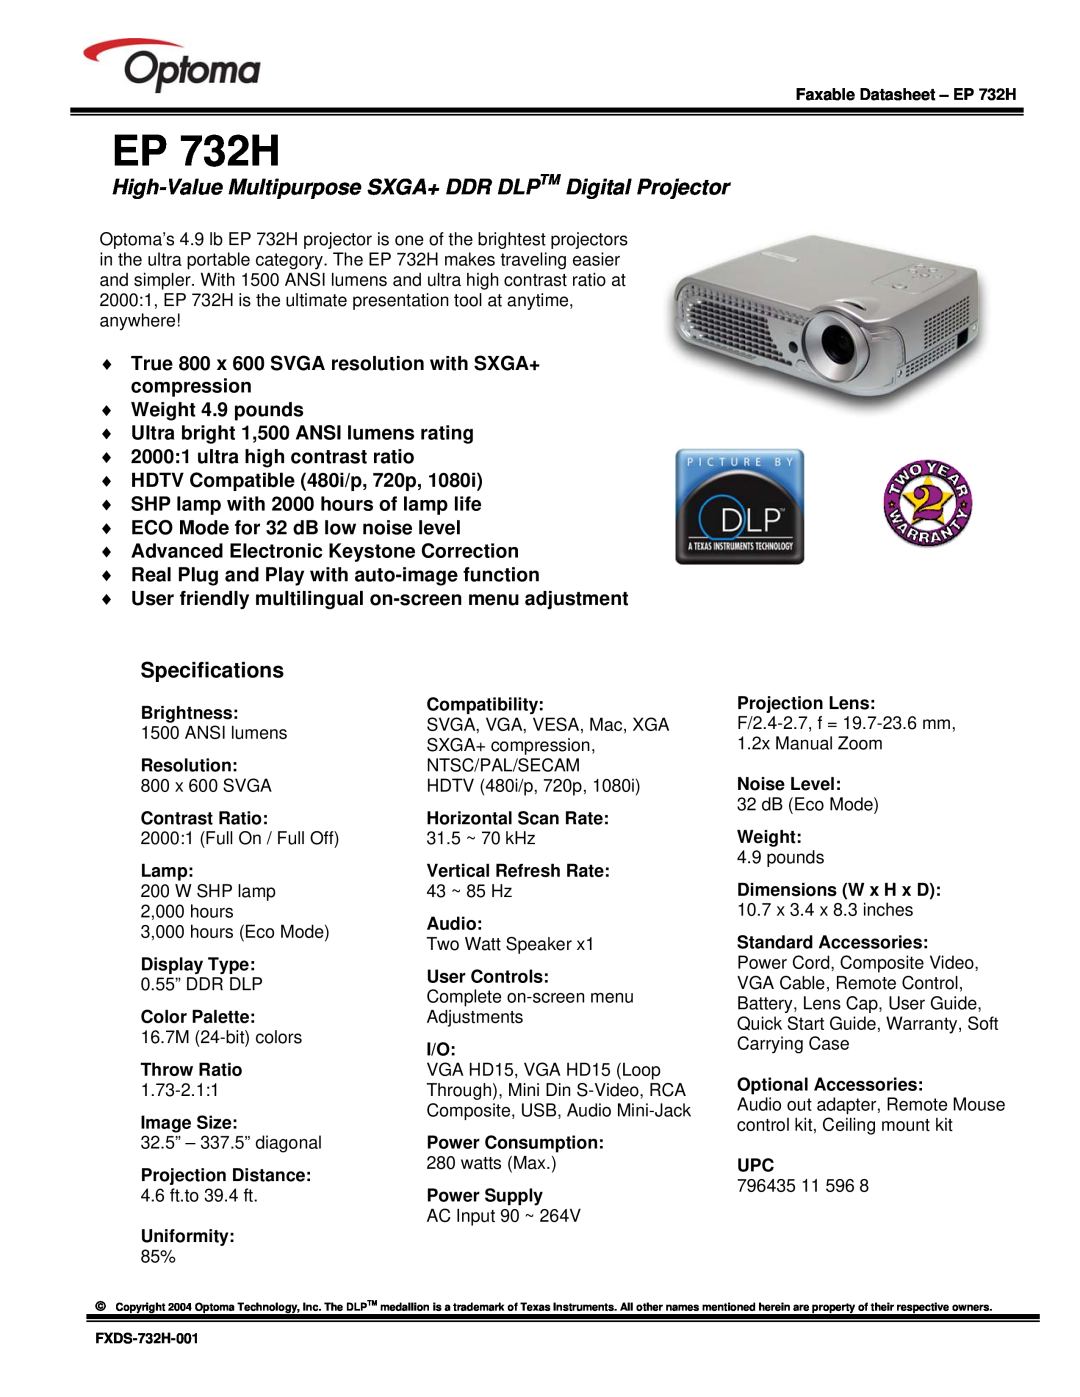 Optoma Technology specifications EP 732H, High-Value Multipurpose SXGA+ DDR DLPTM Digital Projector, Specifications 